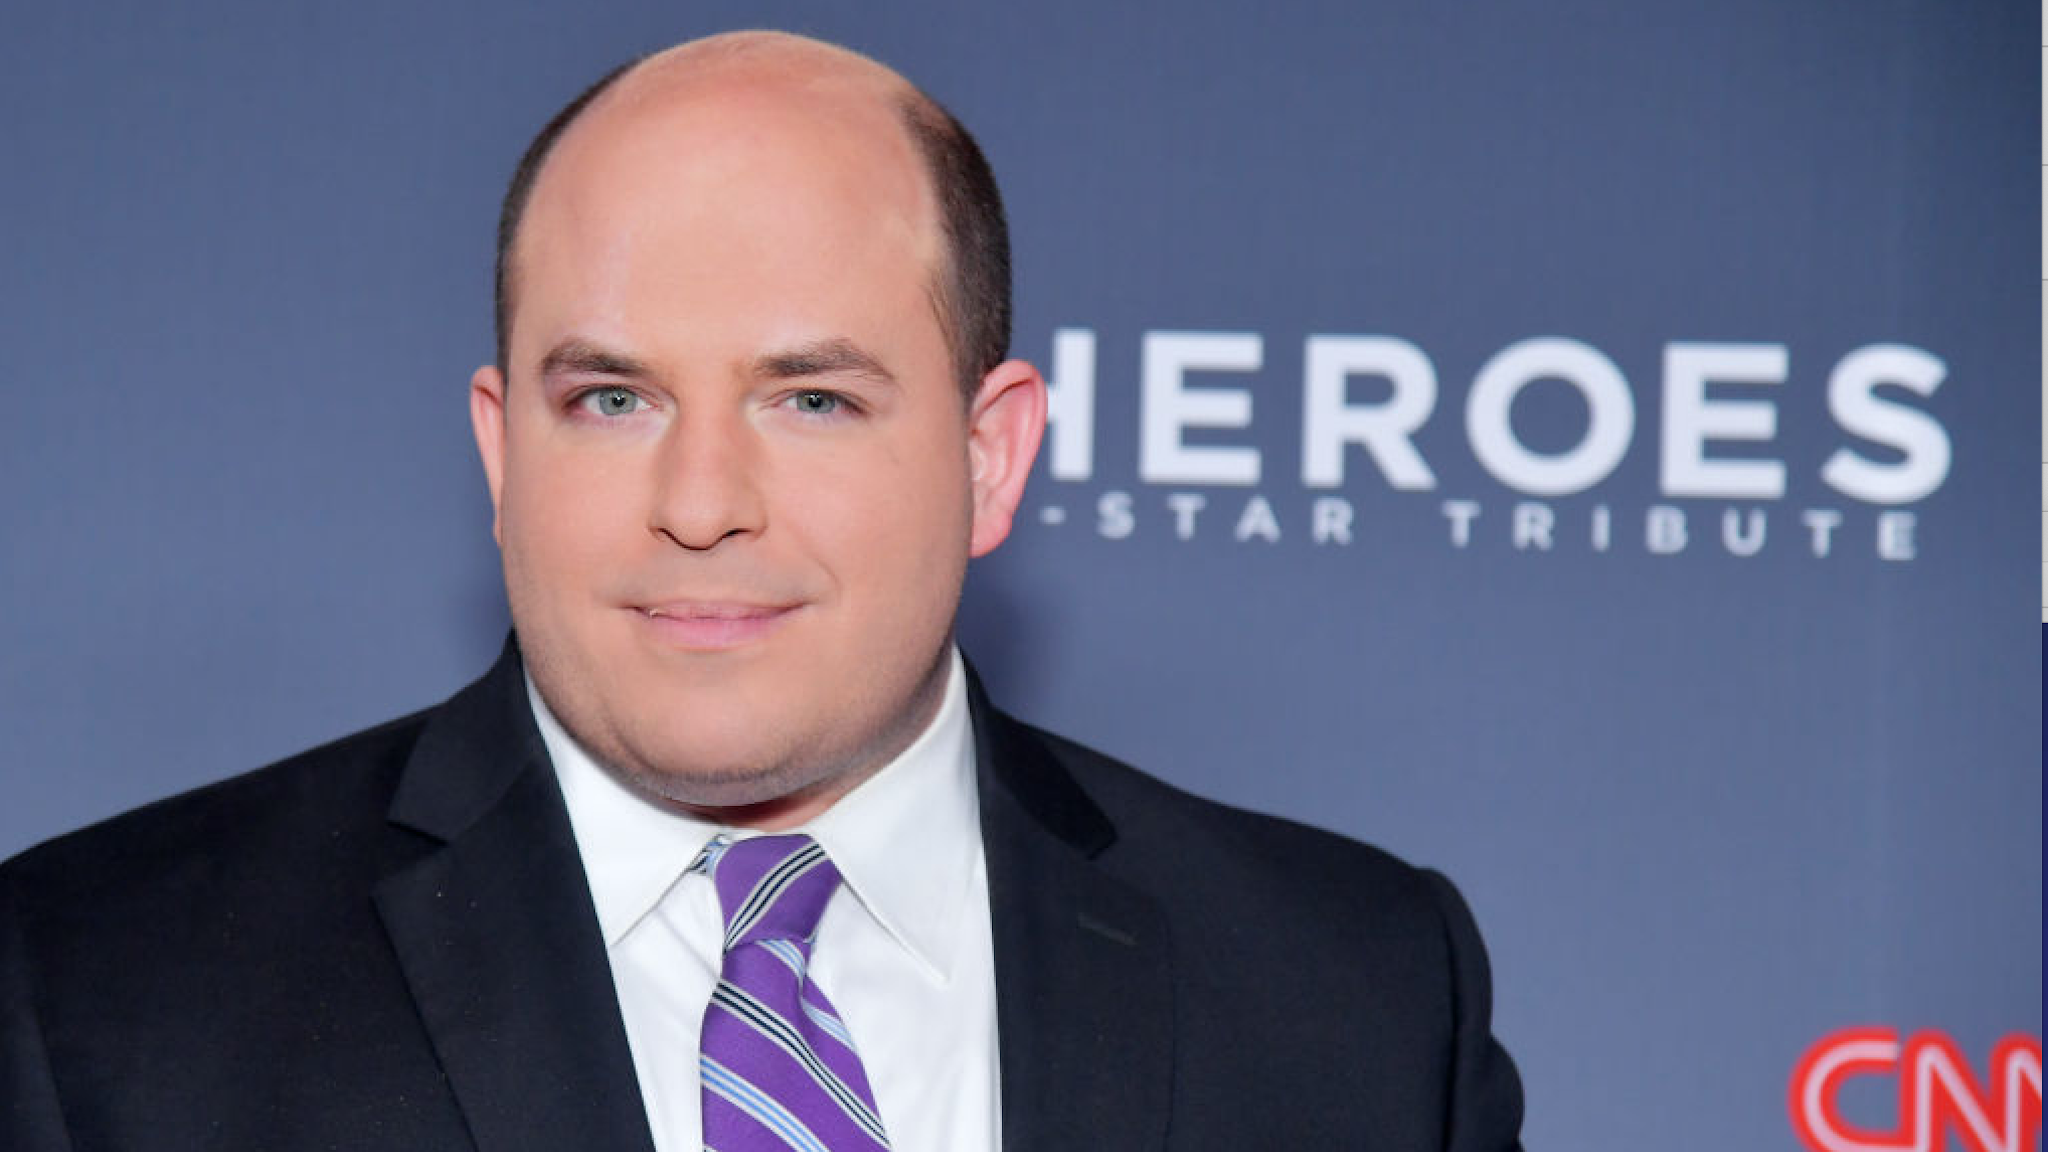 Brian Stelter attends the 12th Annual CNN Heroes: An All-Star Tribute at American Museum of Natural History on December 9, 2018 in New York City.